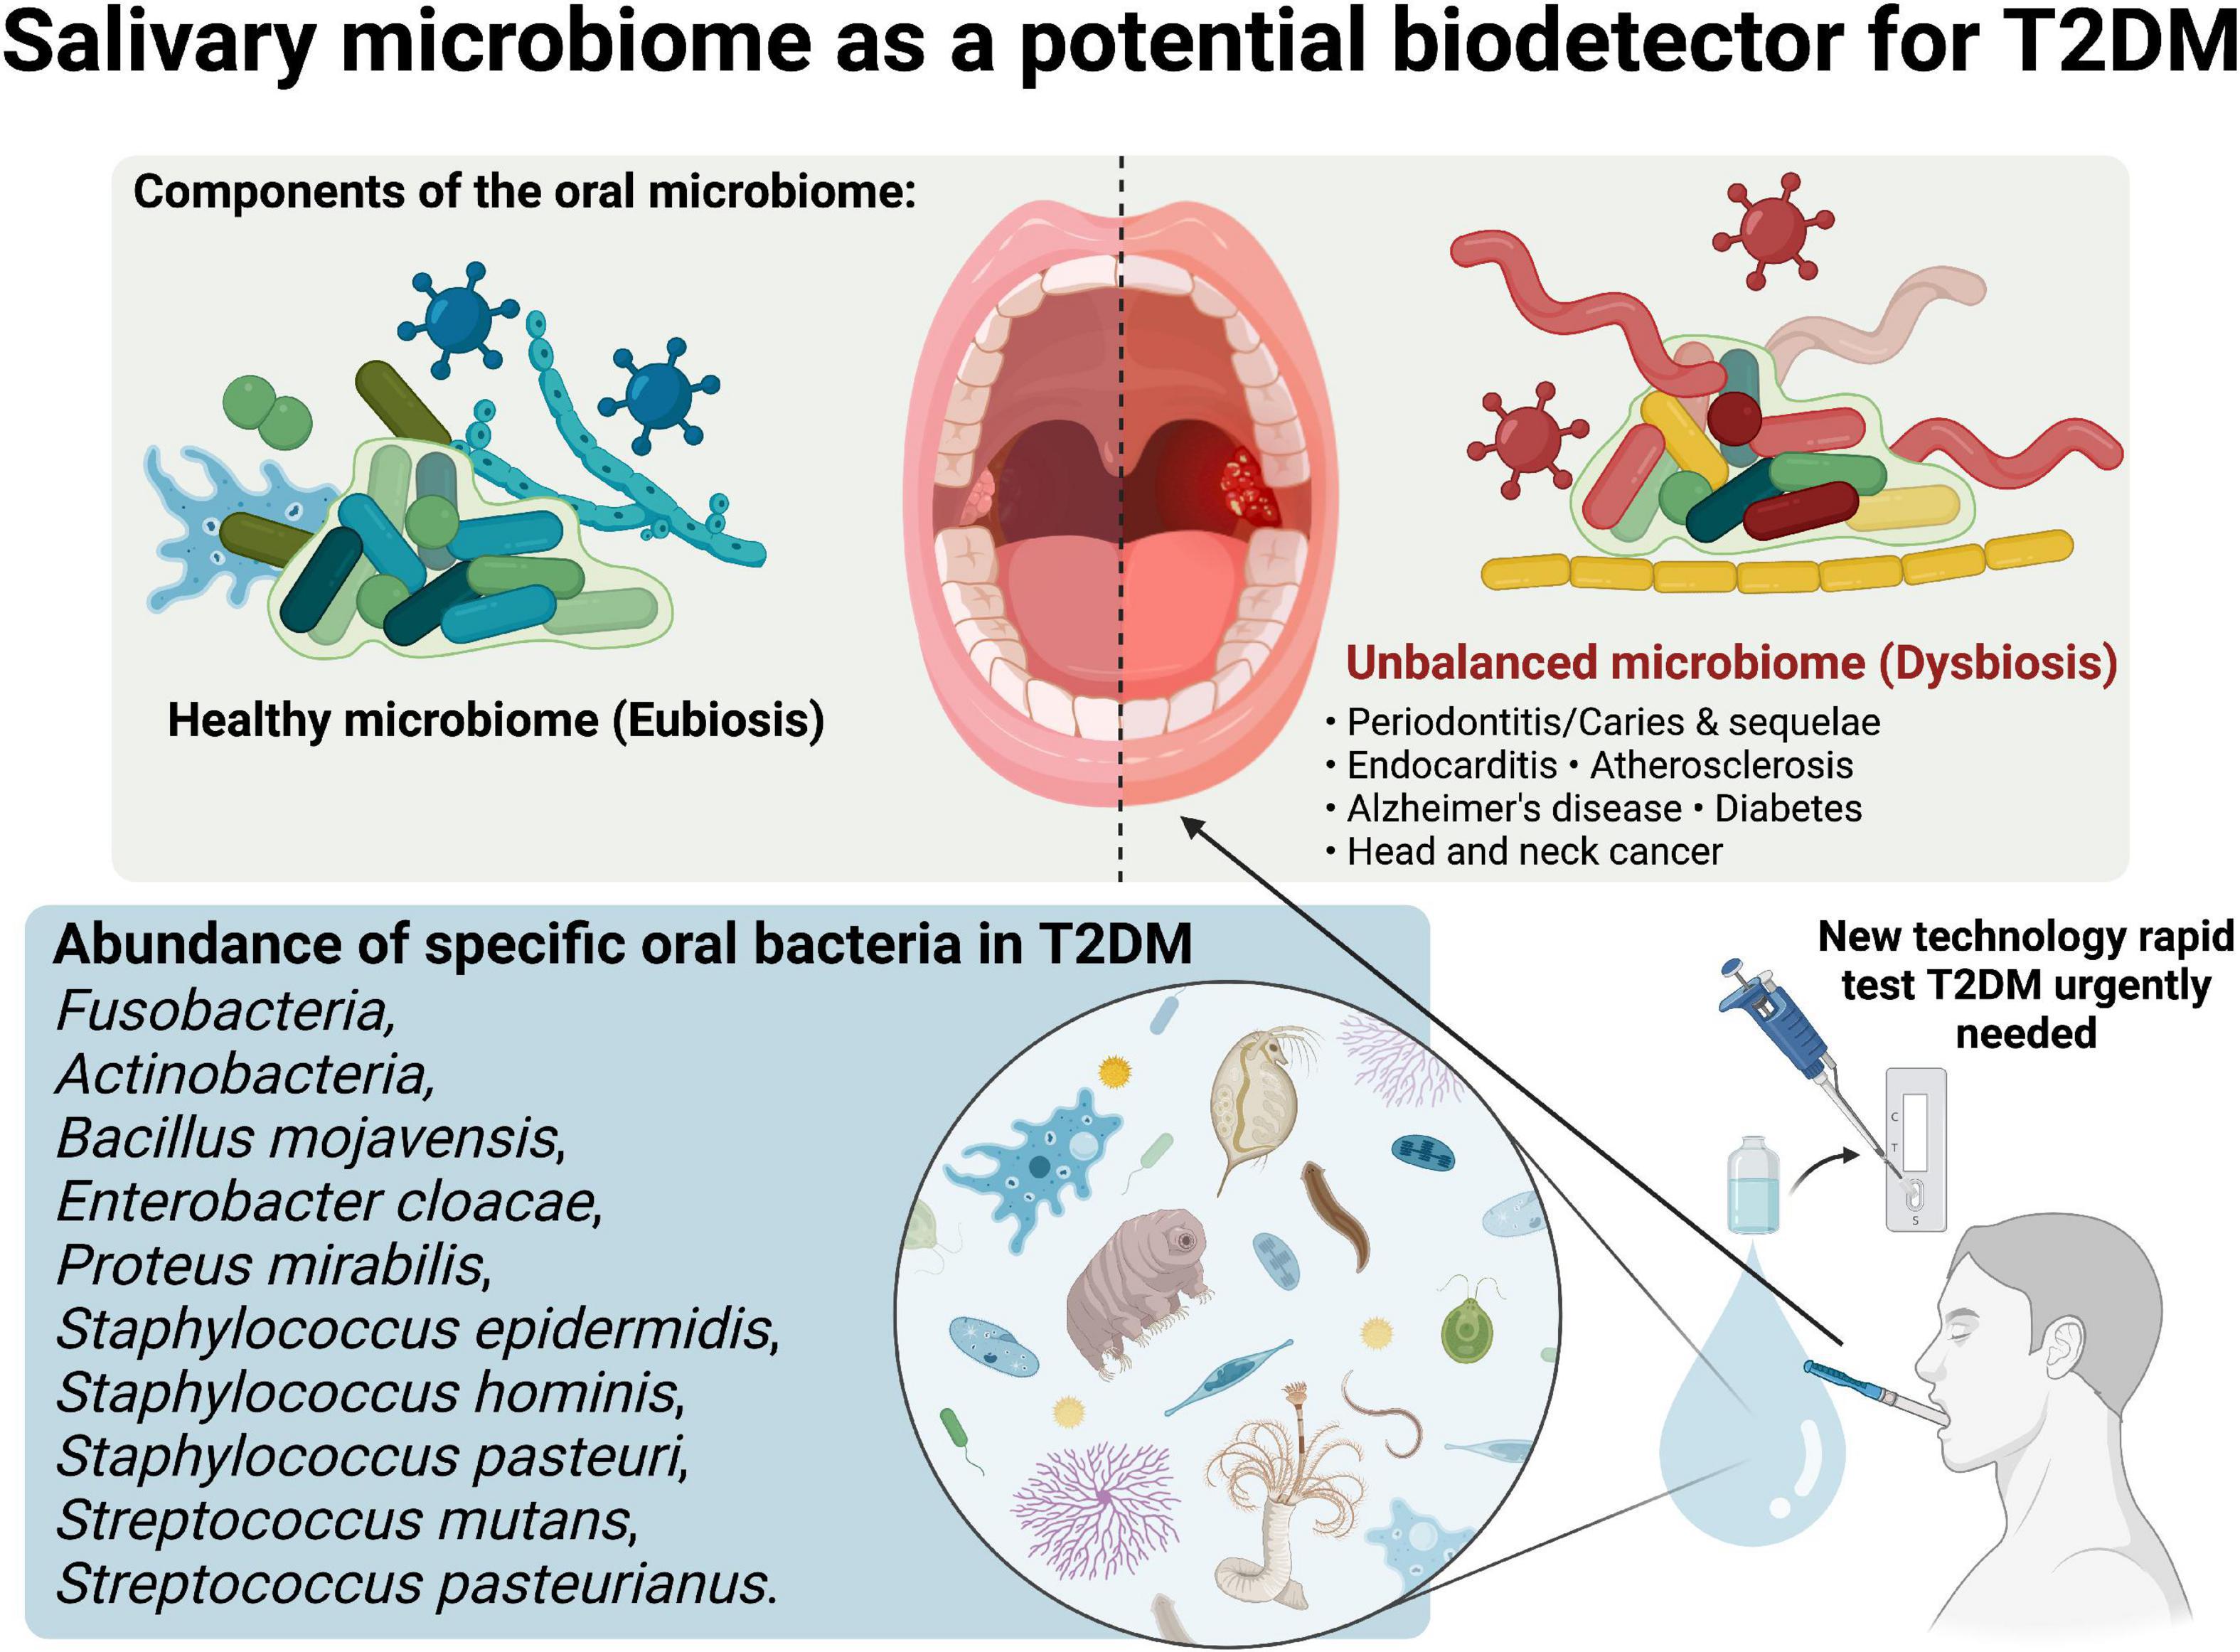 Can salivary microbiome become a biodetector for type-2 diabetes? Opinion for future implications and strategies